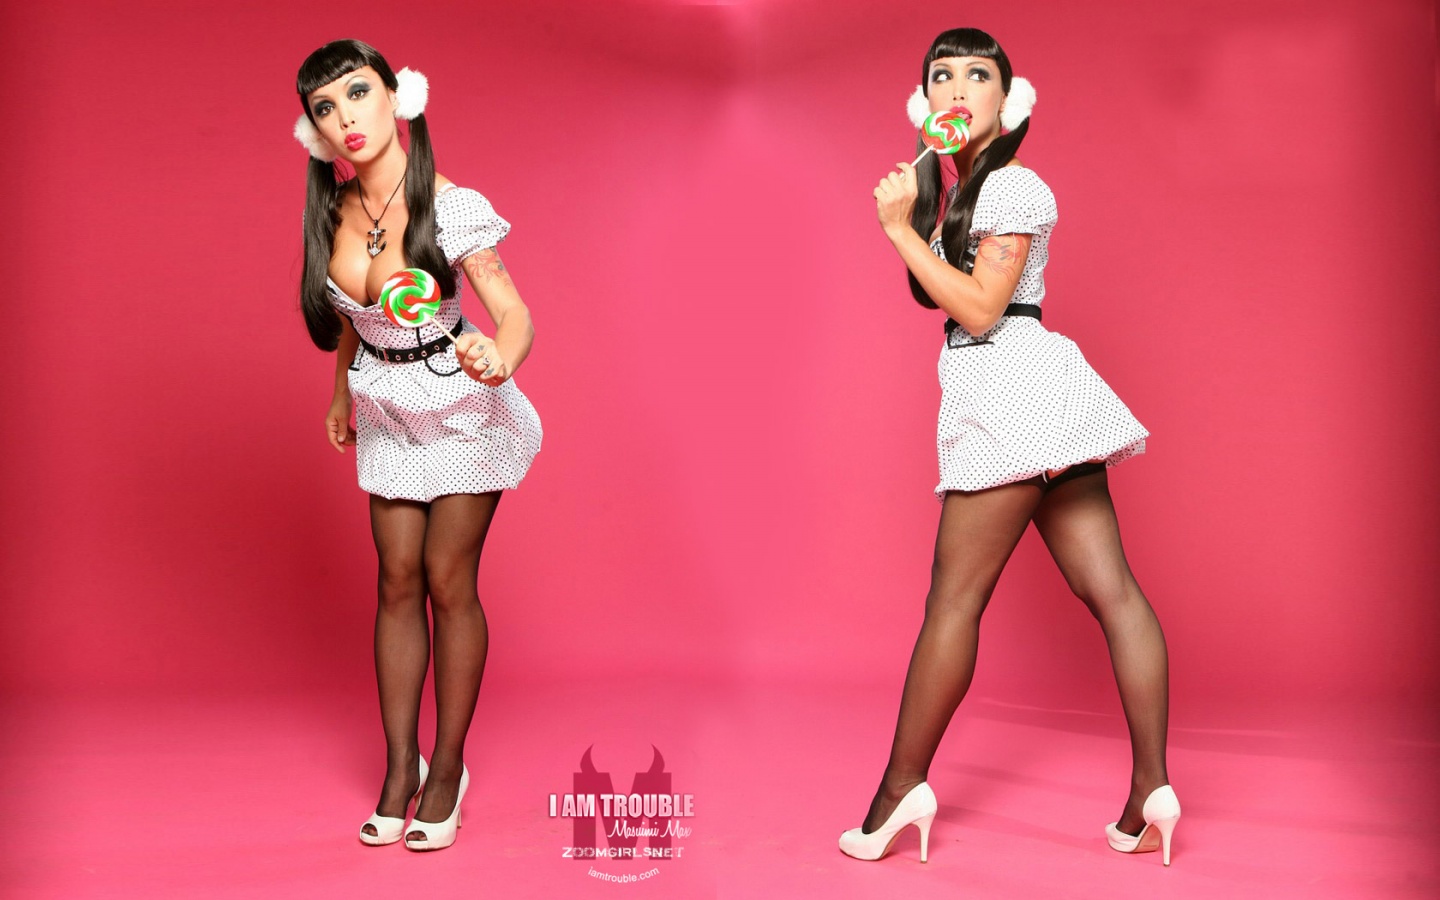 Masuimi Max Posing As A Doll With Candy Wallpaper 1440x900 Nude Models And Pornstars Wallpapers